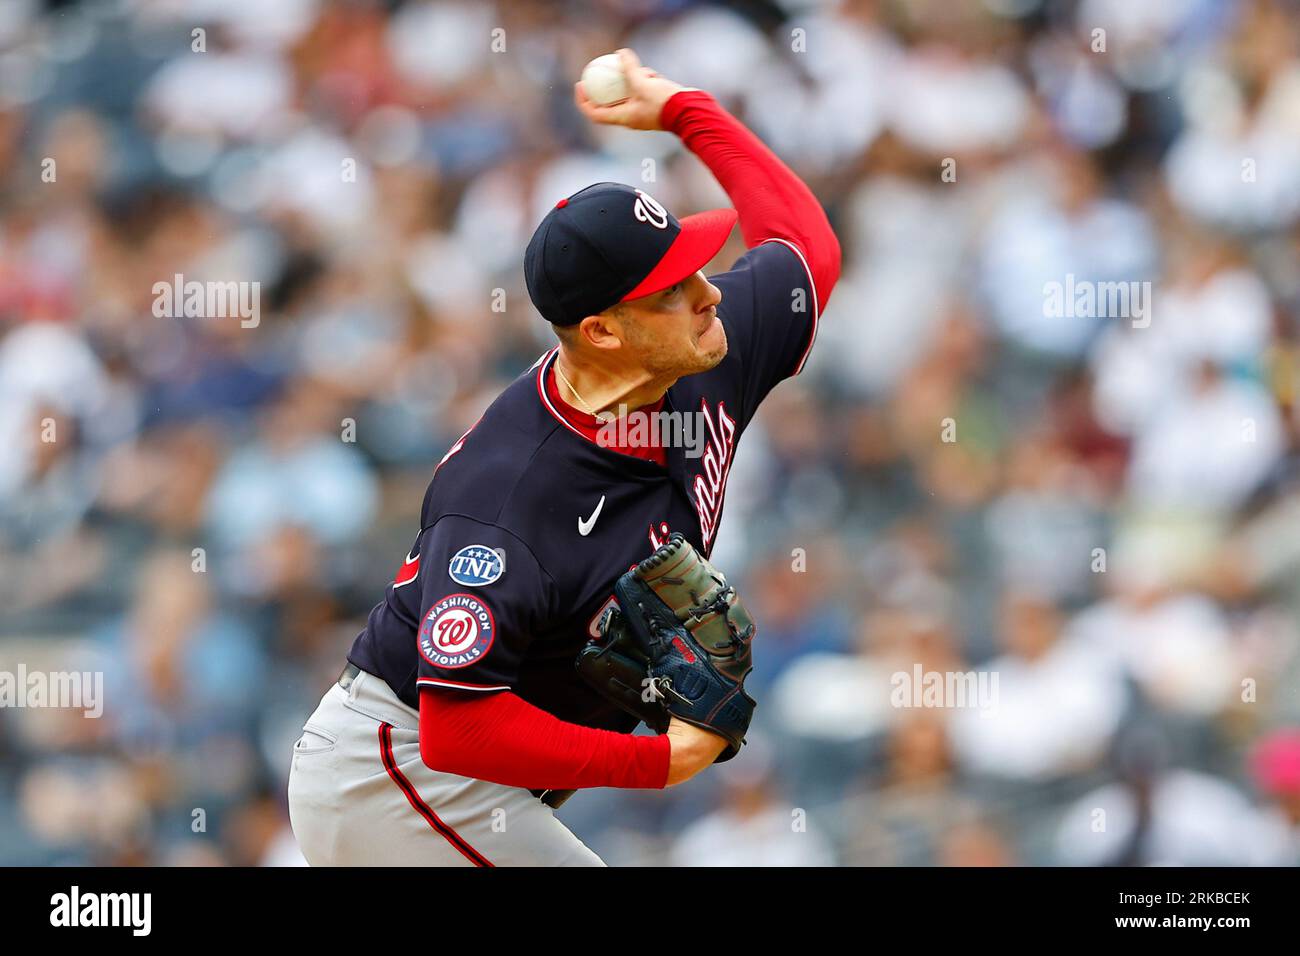 BRONX, NY - AUGUST 24: Patrick Corbin #46 of the Washington Nationals  pitches during the Major League Baseball game against theNew York Yankees  on August 24, 2023 at Yankee Stadium in the